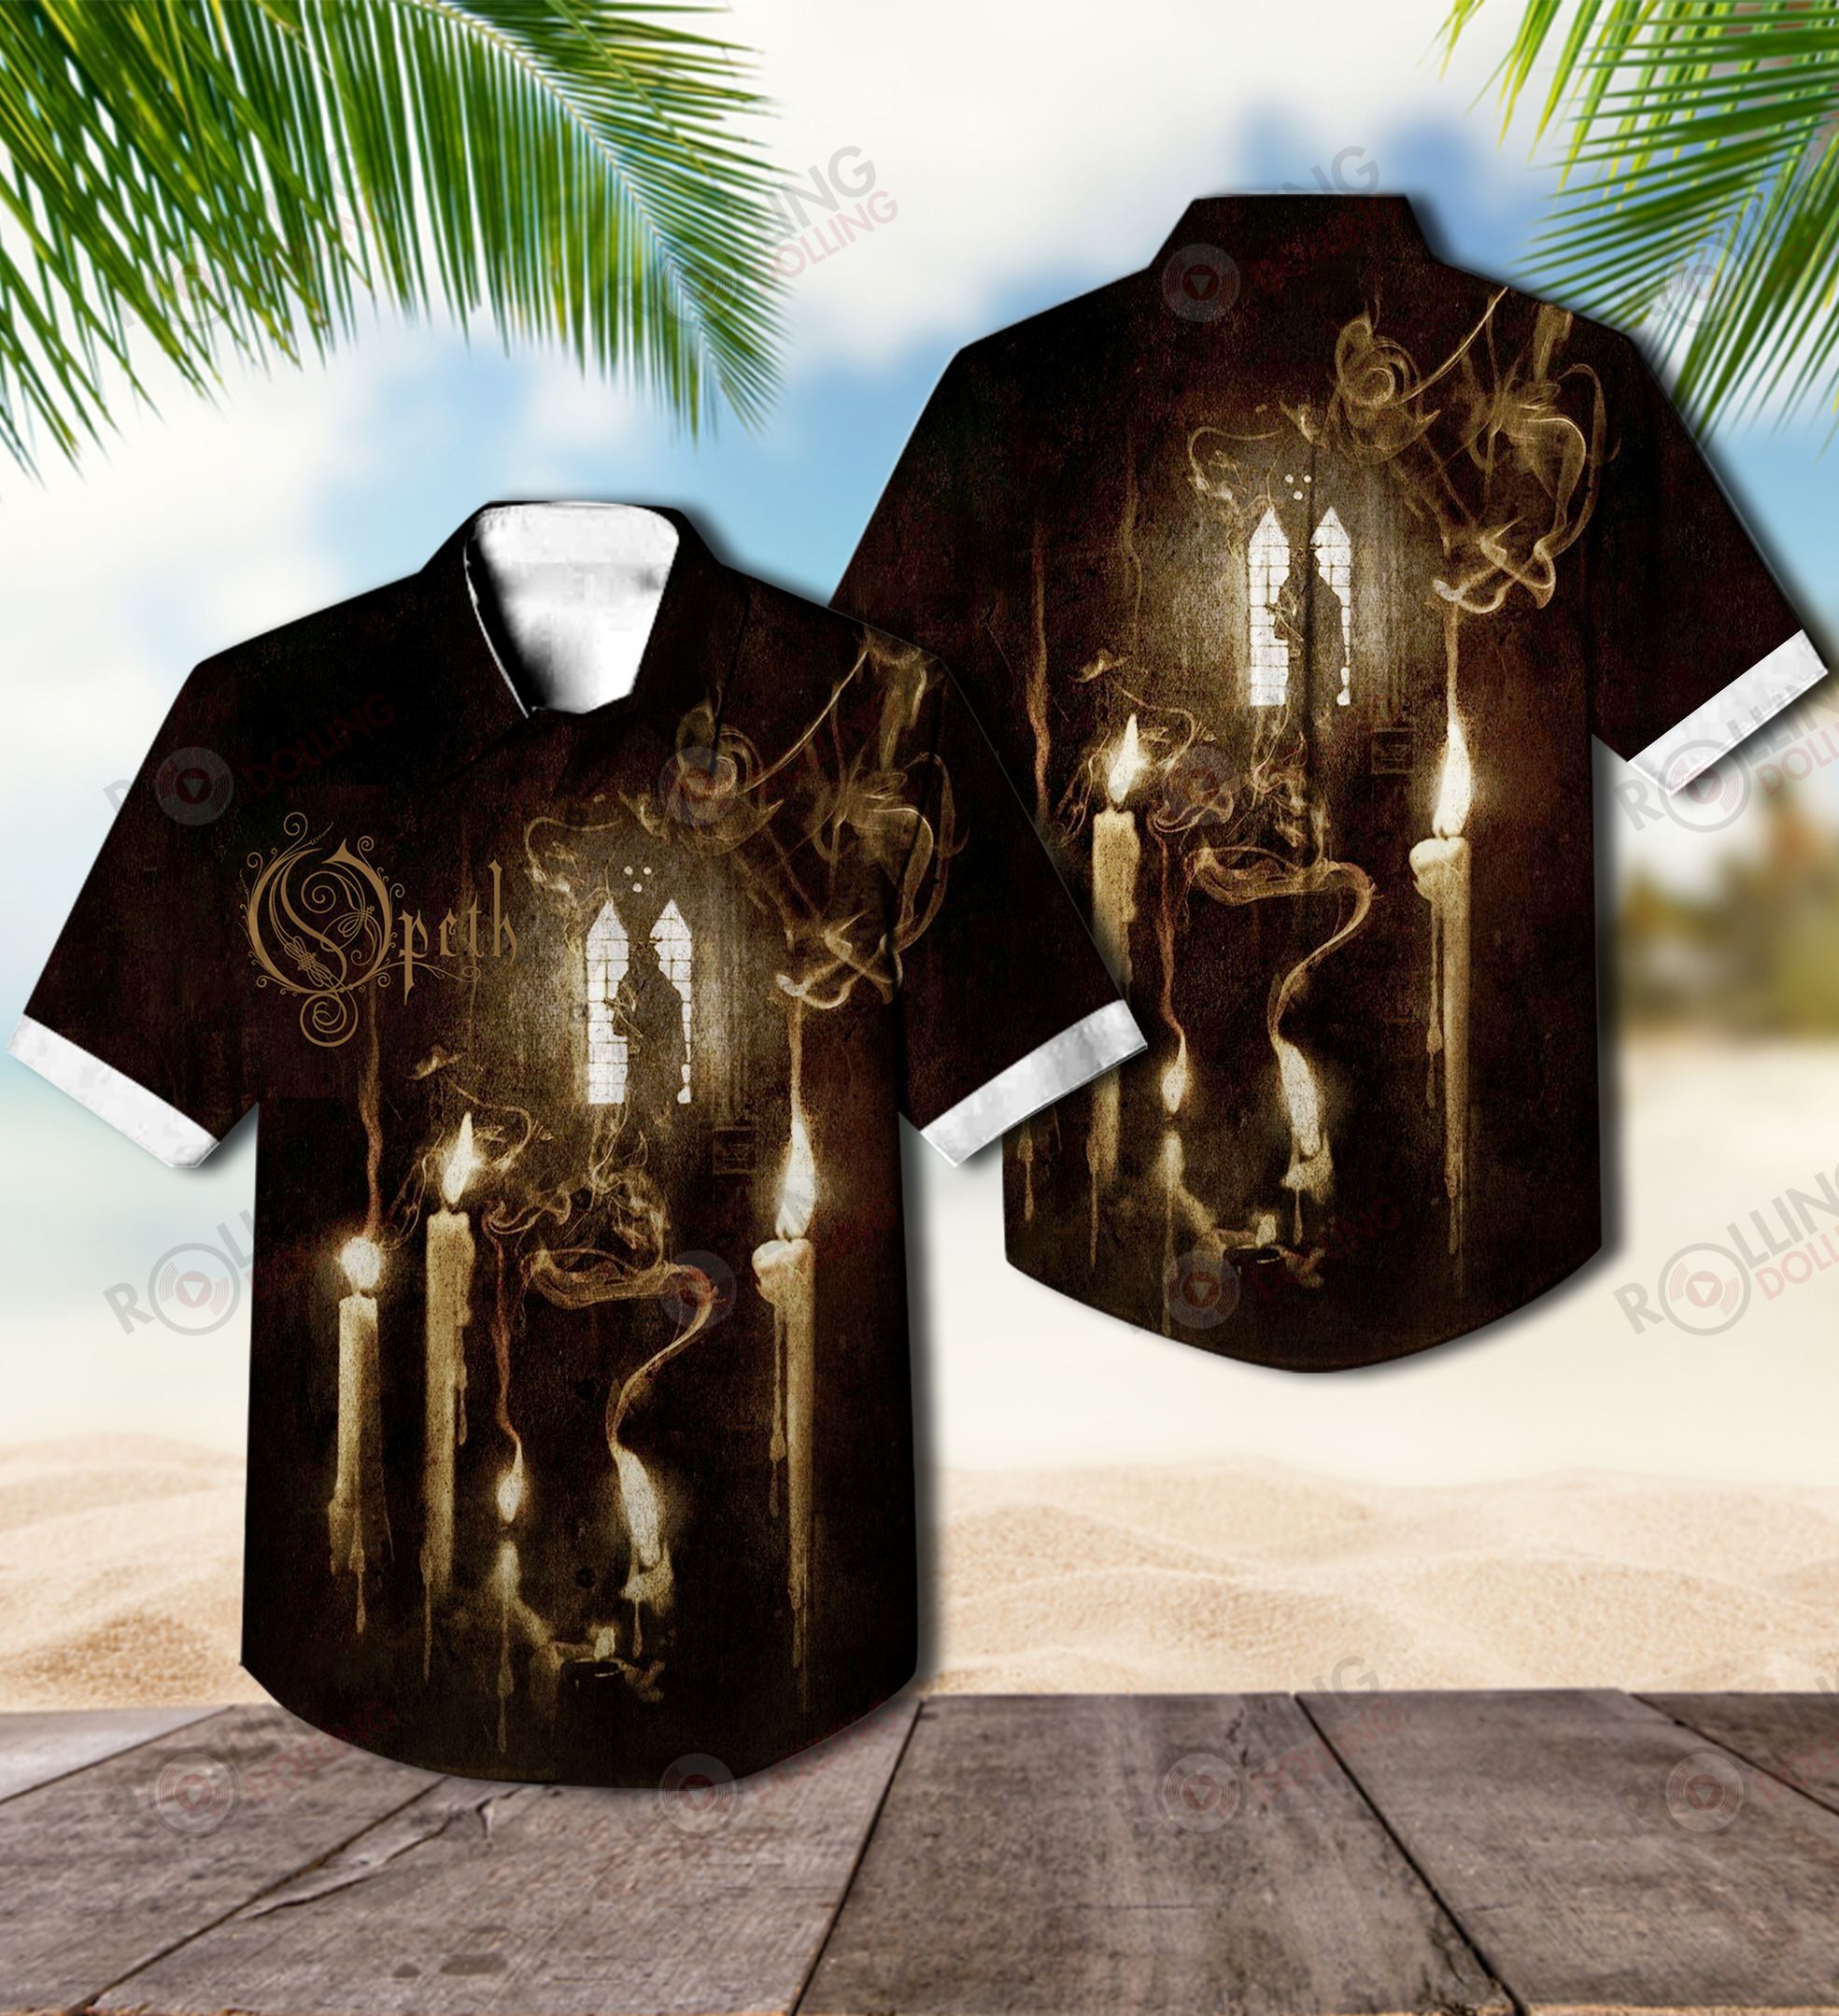 The Hawaiian Shirt is a popular shirt that is worn by Rock band fans 22